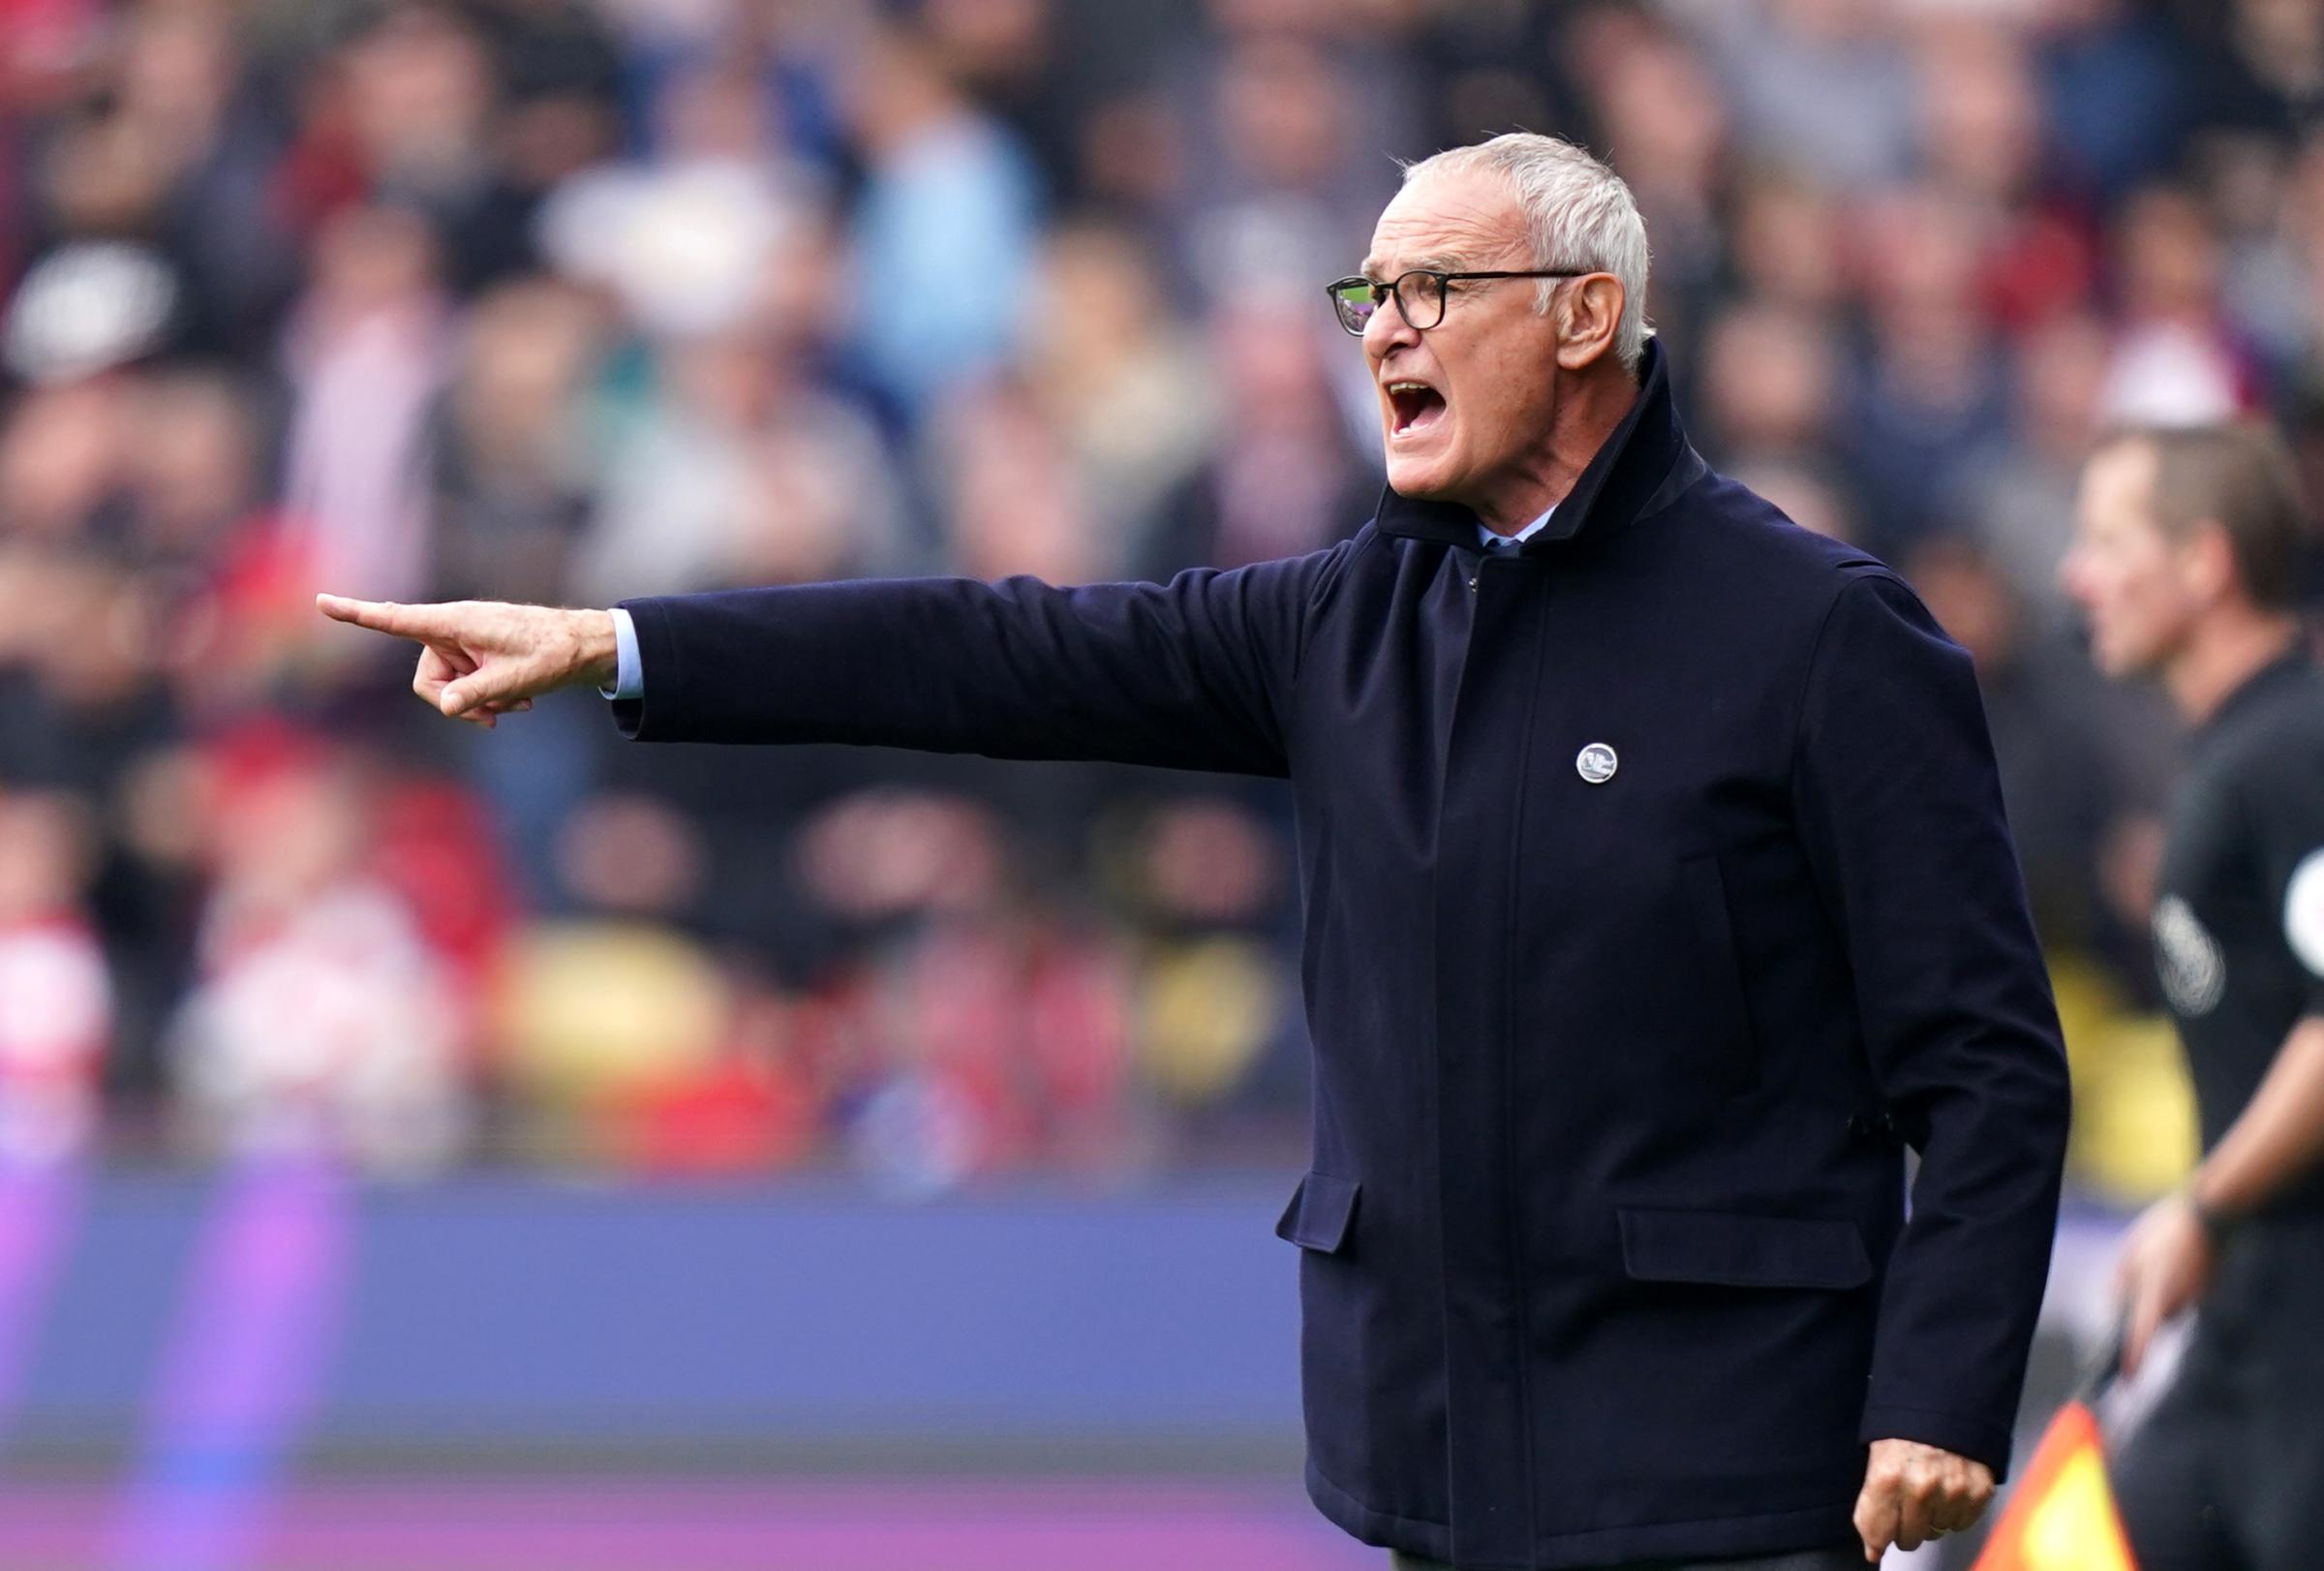 Claudio Ranieri wants Watford to become more consistent